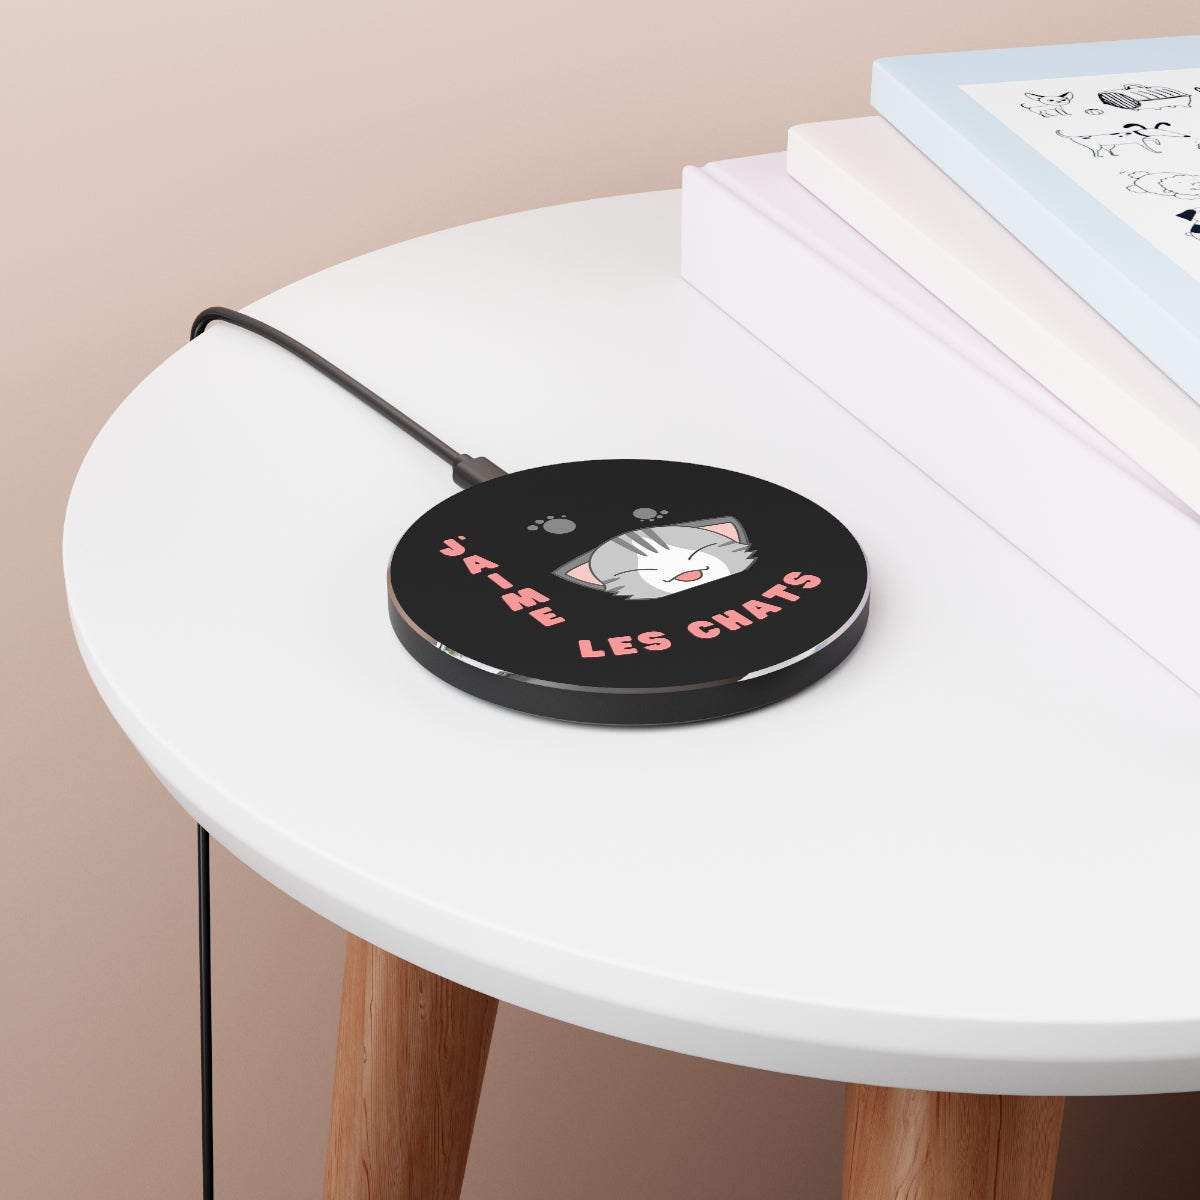 Pink Black Wireless Charger - J'aime les chats